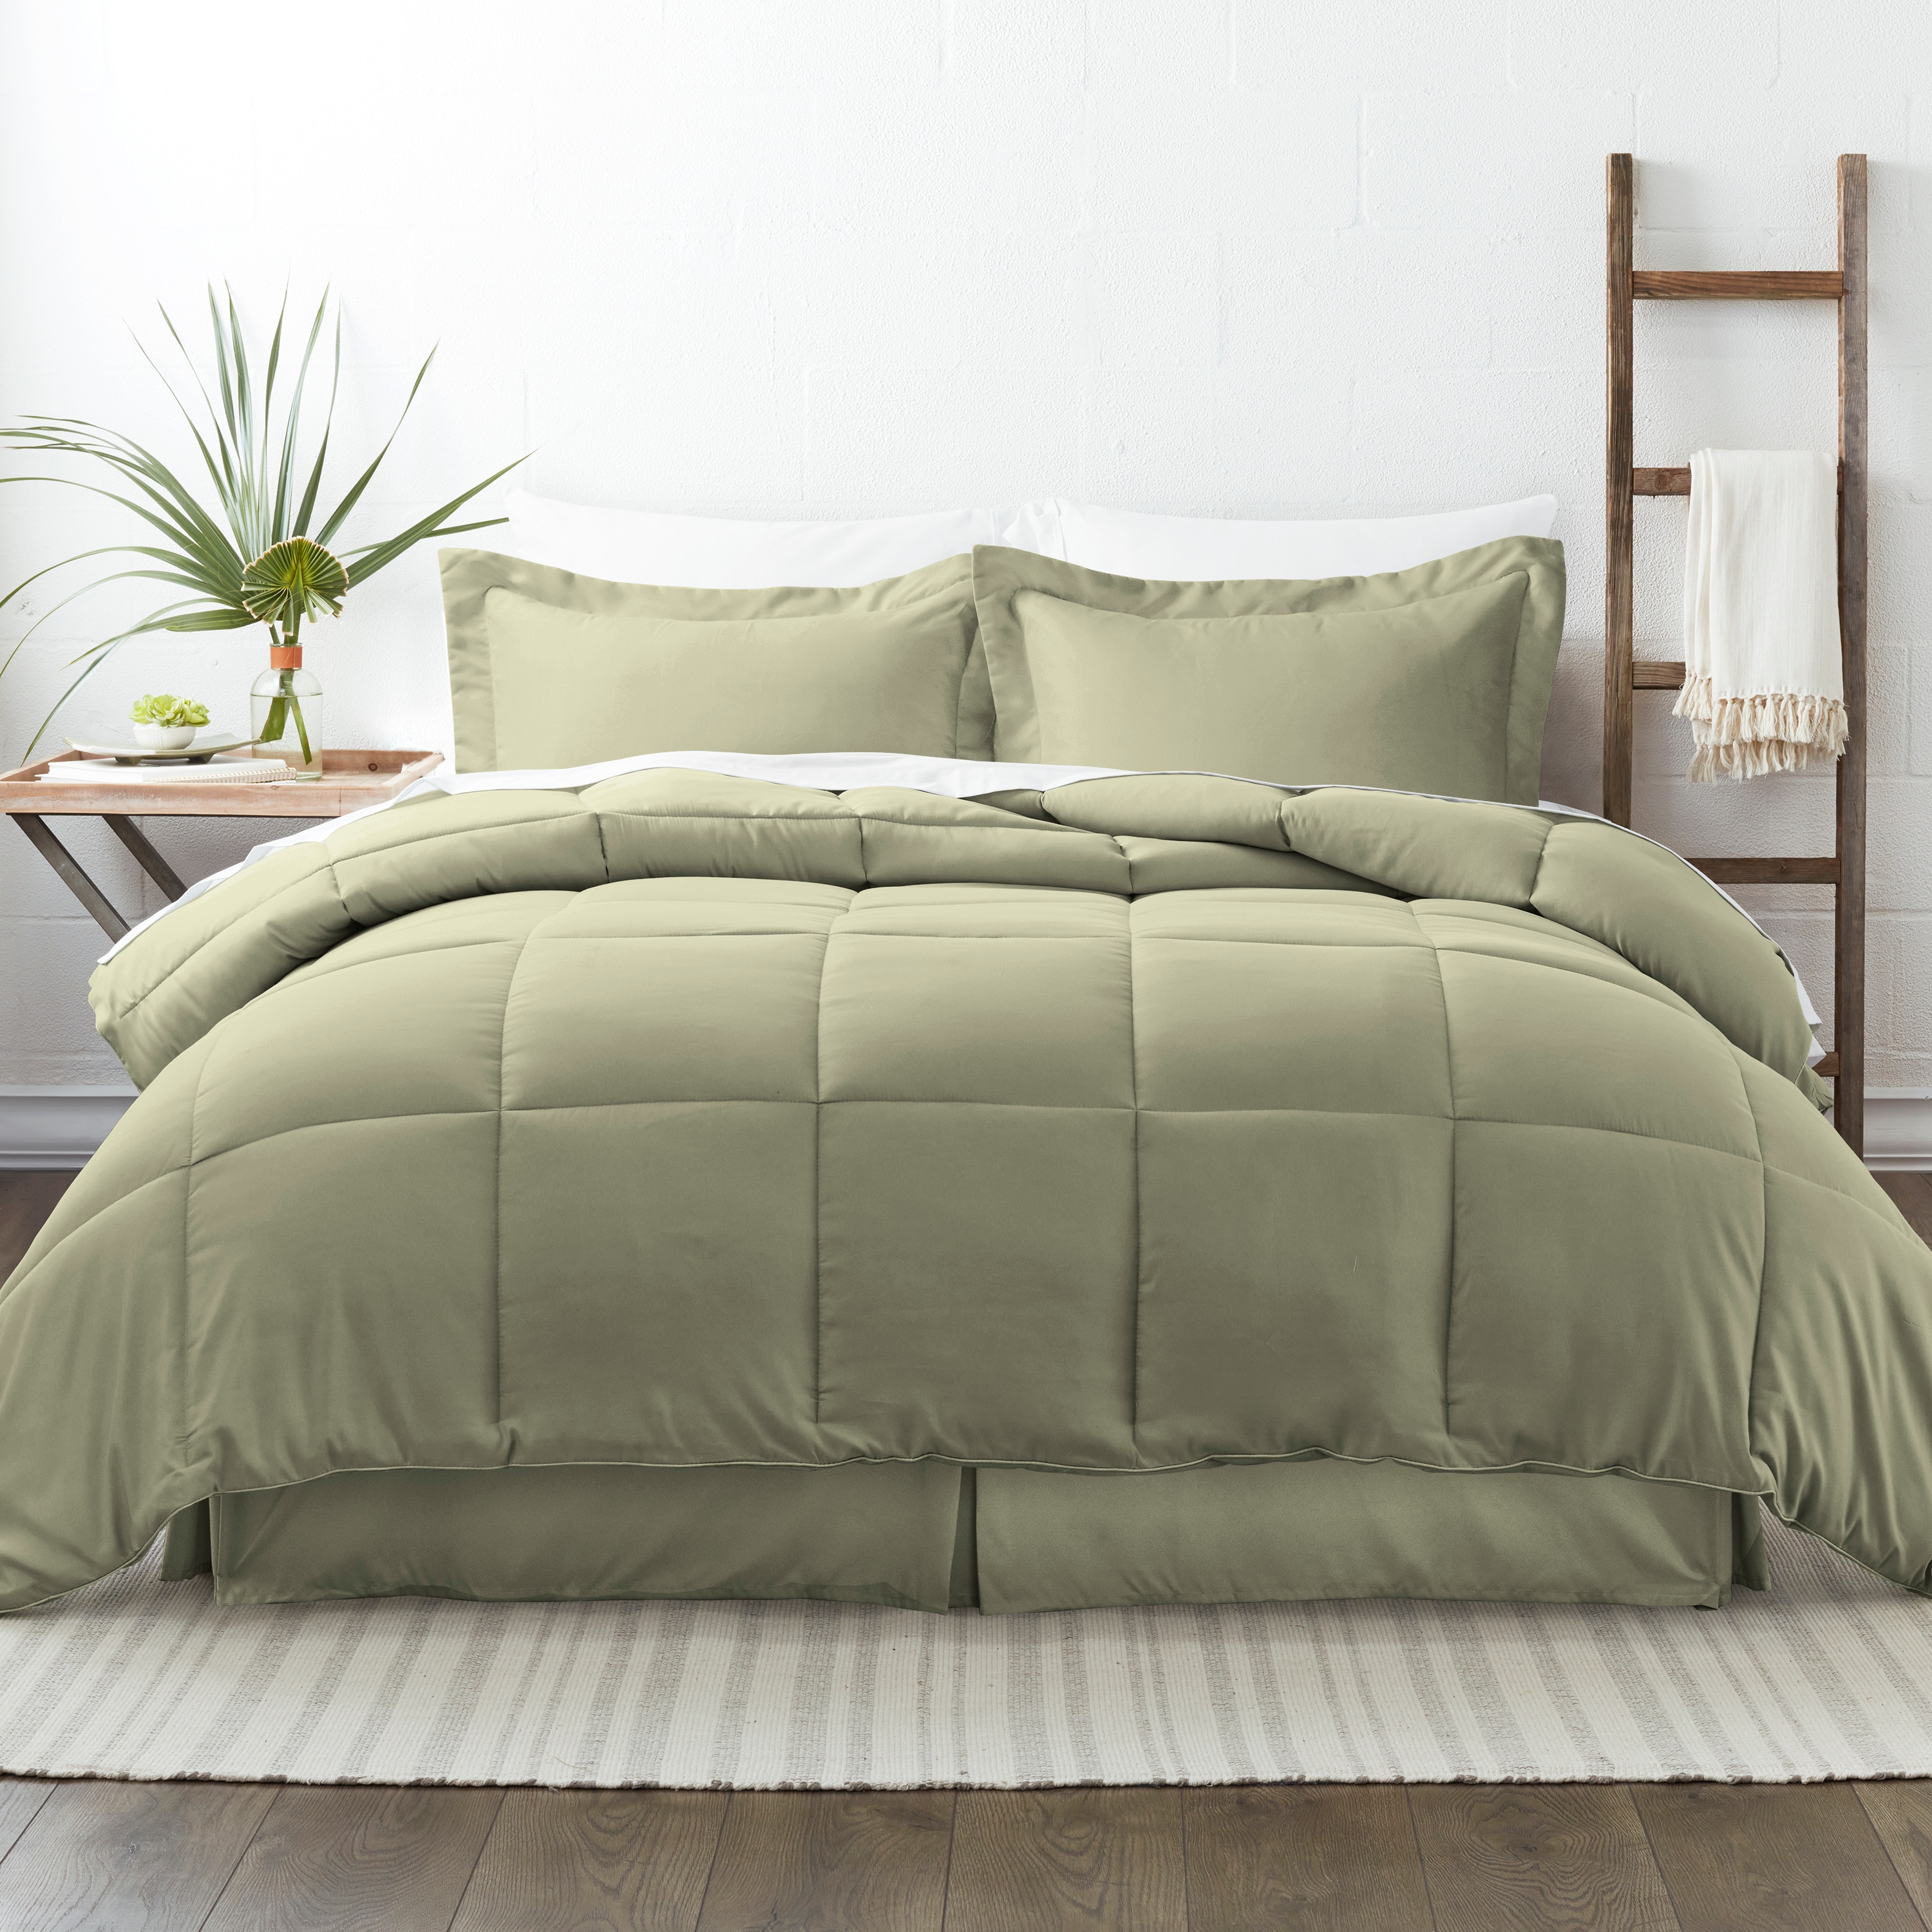 Ienjoy Home Home 8 Piece Sage California King Comforter Set In The Bedding Sets Department At Lowes Com